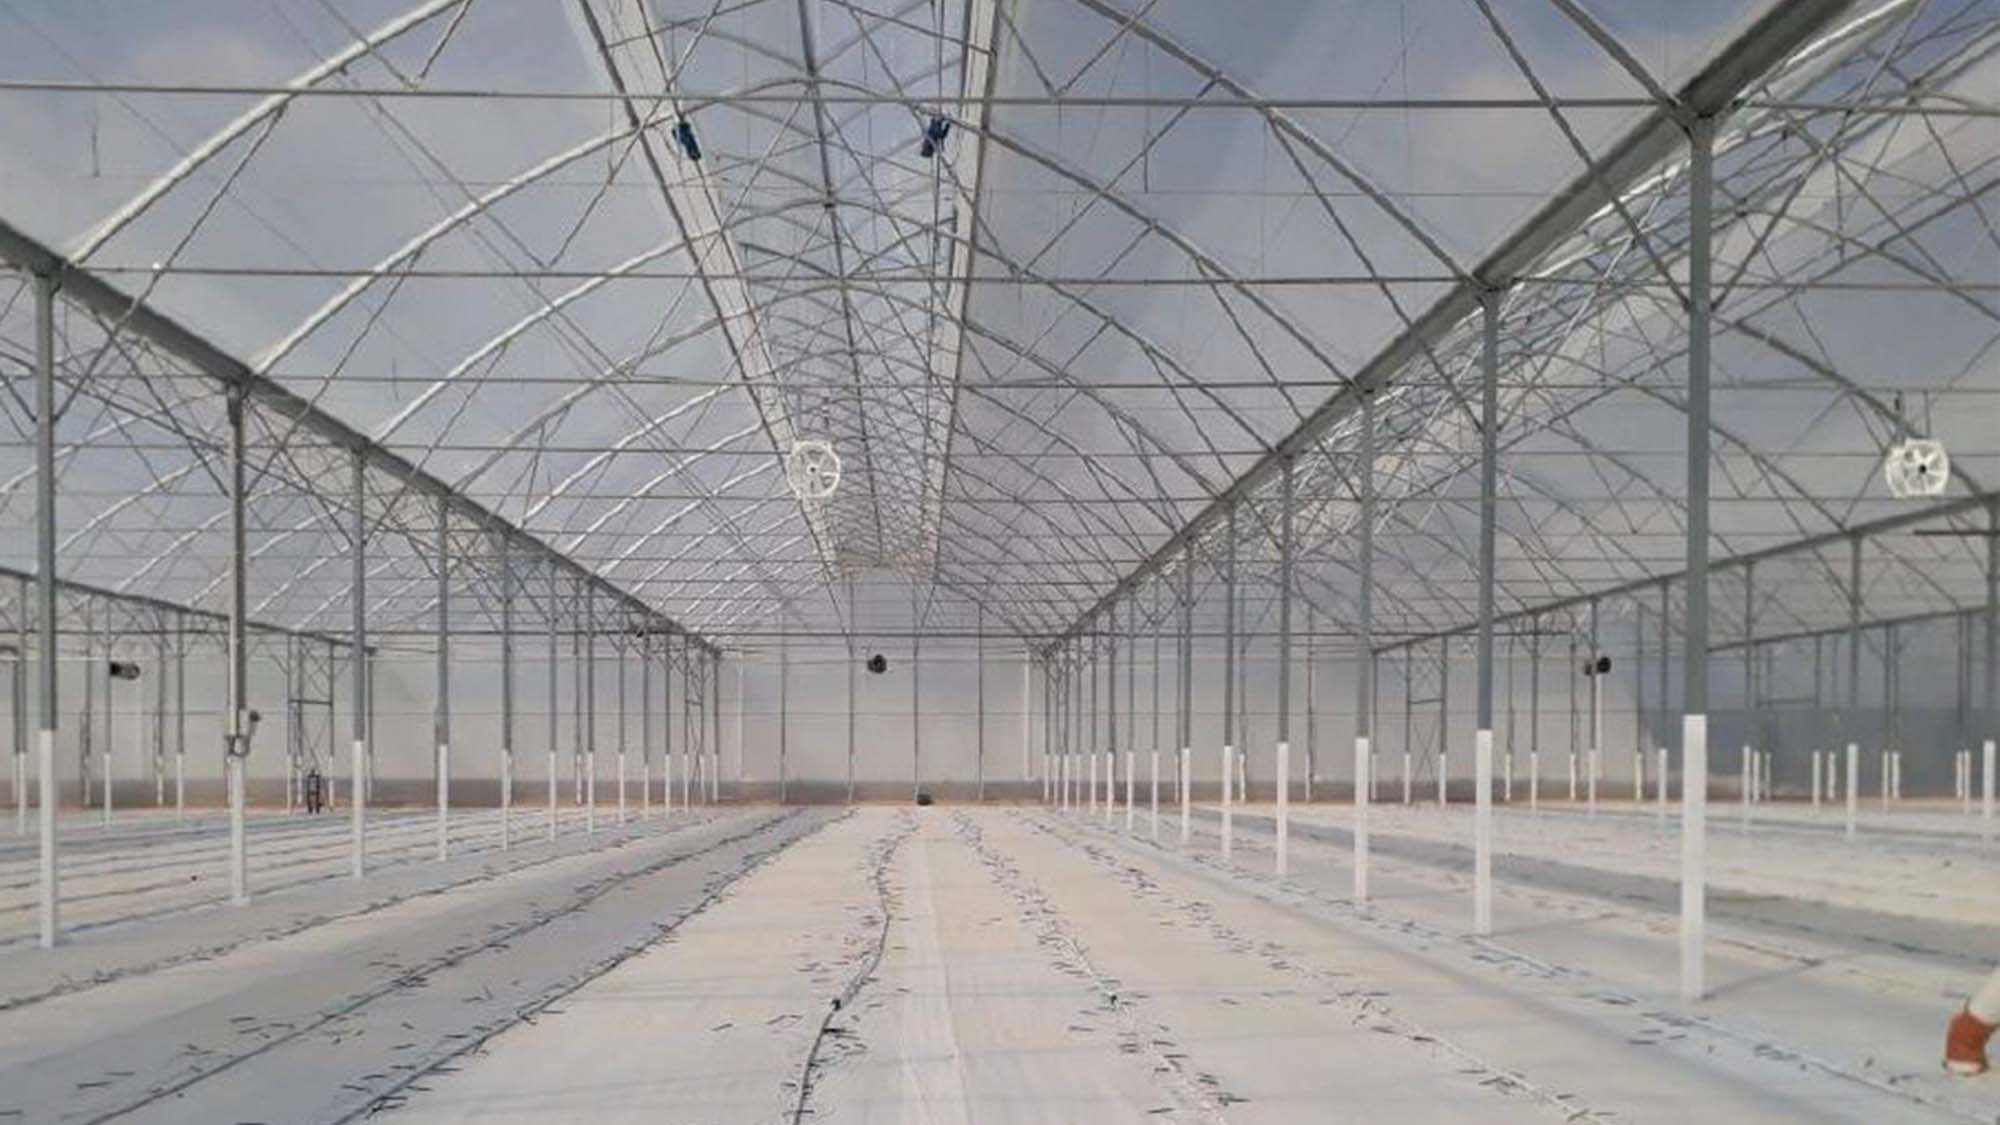 ULMA Agrícola undertakes a hydroponictomato growing project in Mexico